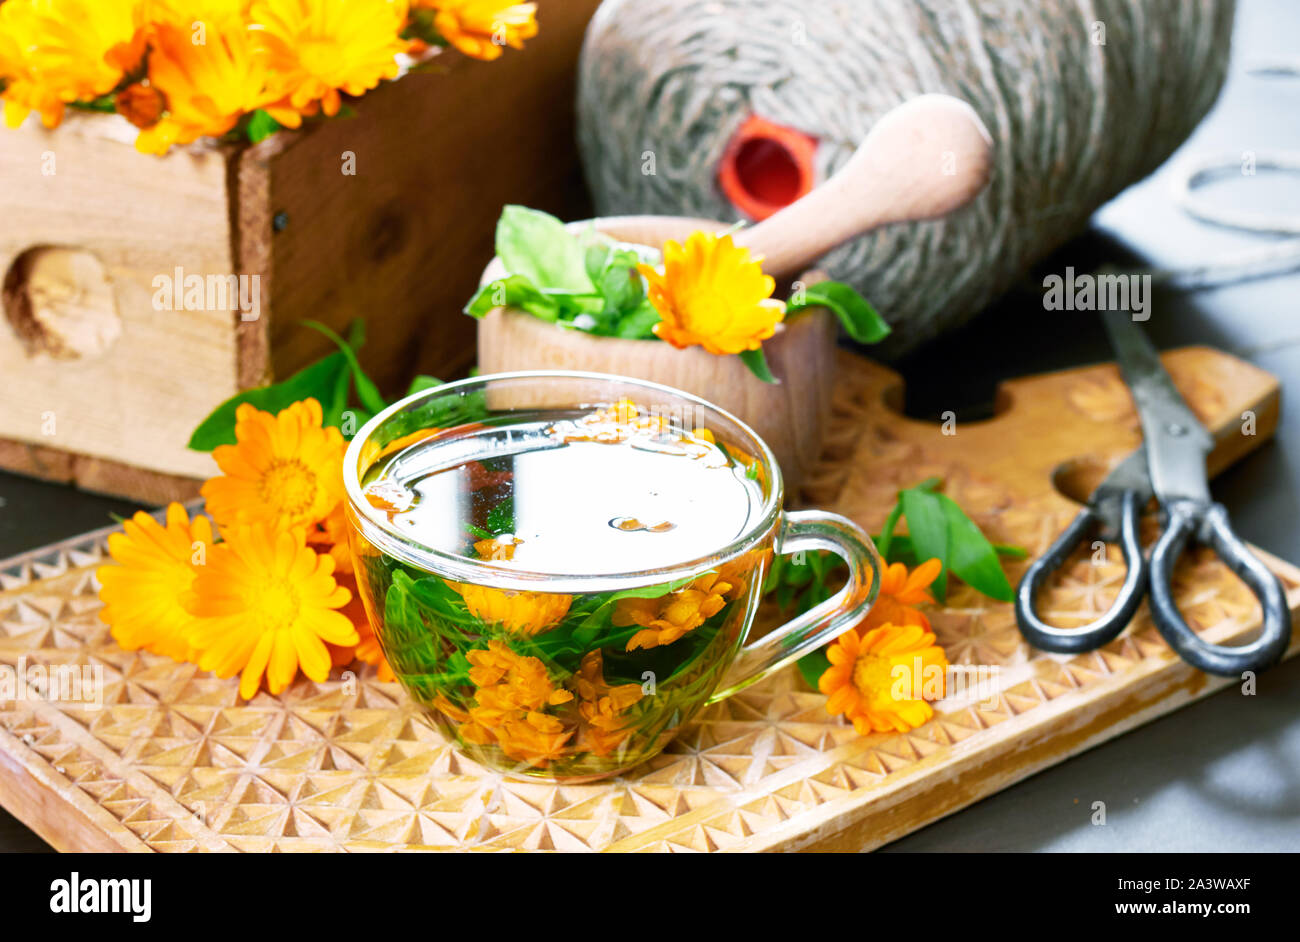 A cup of calendula tea, herbal healing drink made of bunch of fresh flowers with marigold bouquet nearby, a mortar with pounder,  wooden box with cut Stock Photo